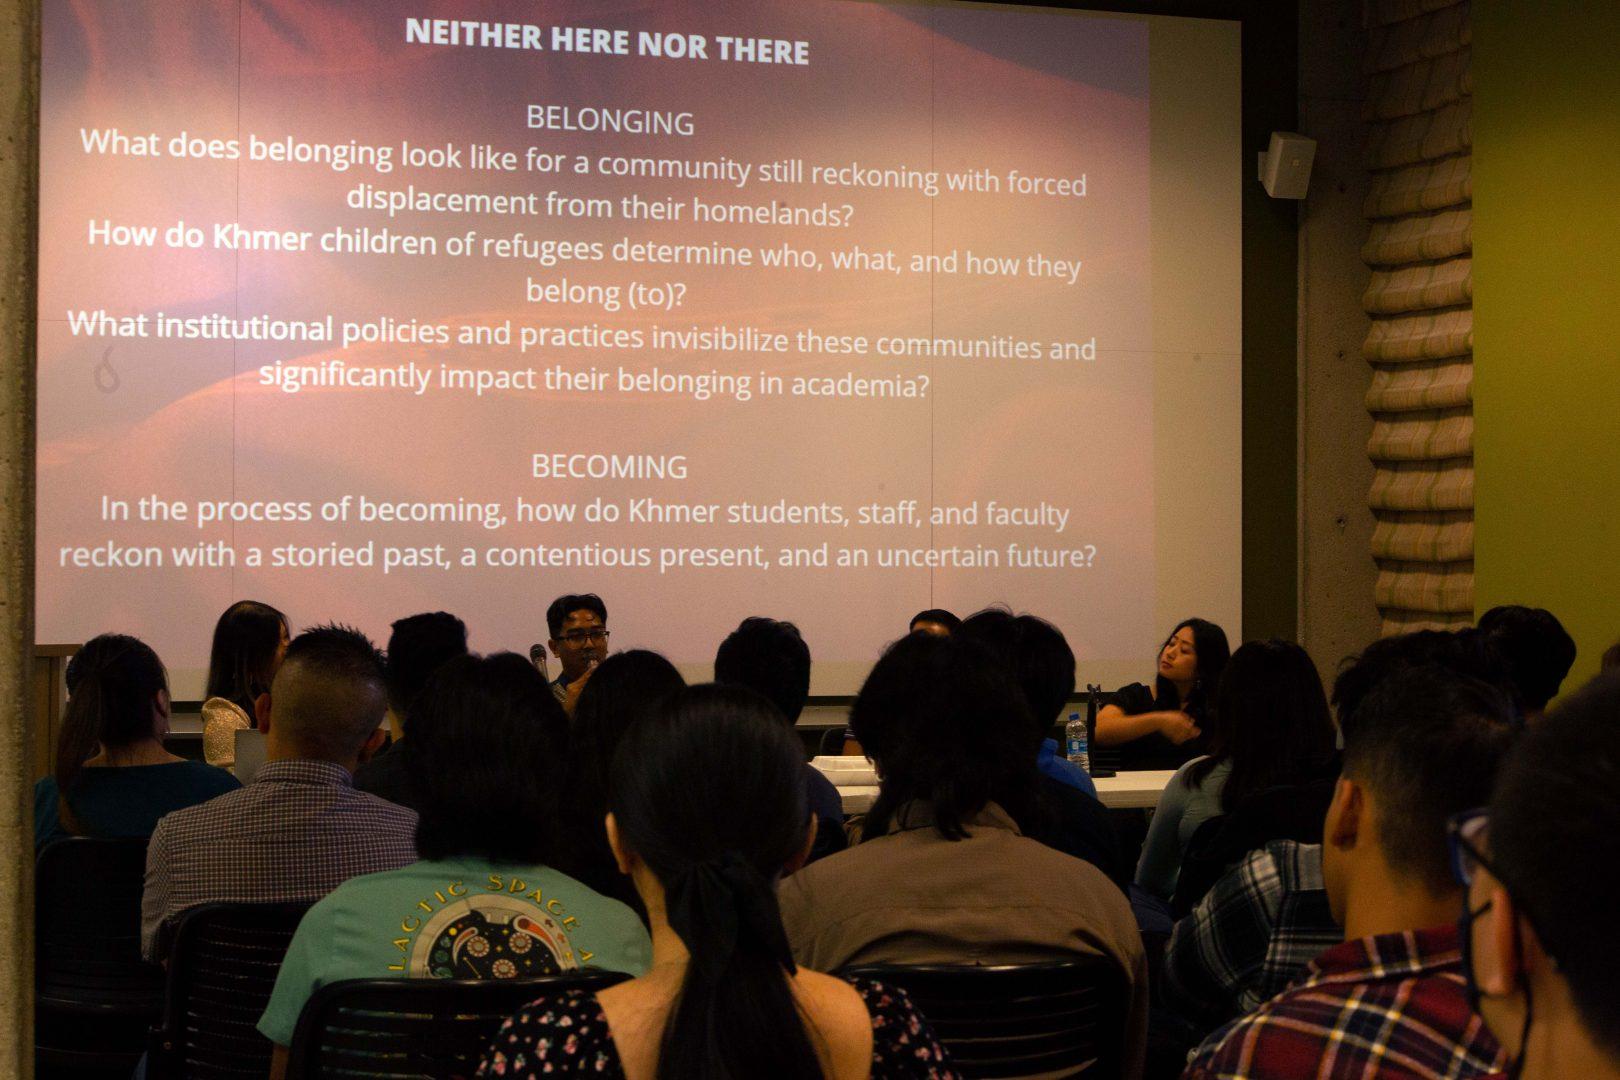 Four panelists spoke about the Khmer experience at Fresno State and higher education during  “Neither Here Nor There: Khmer Reflections on Belonging and Becoming at Fresno State” on Oct. 12. (Jannah Geraldo/The Collegian)